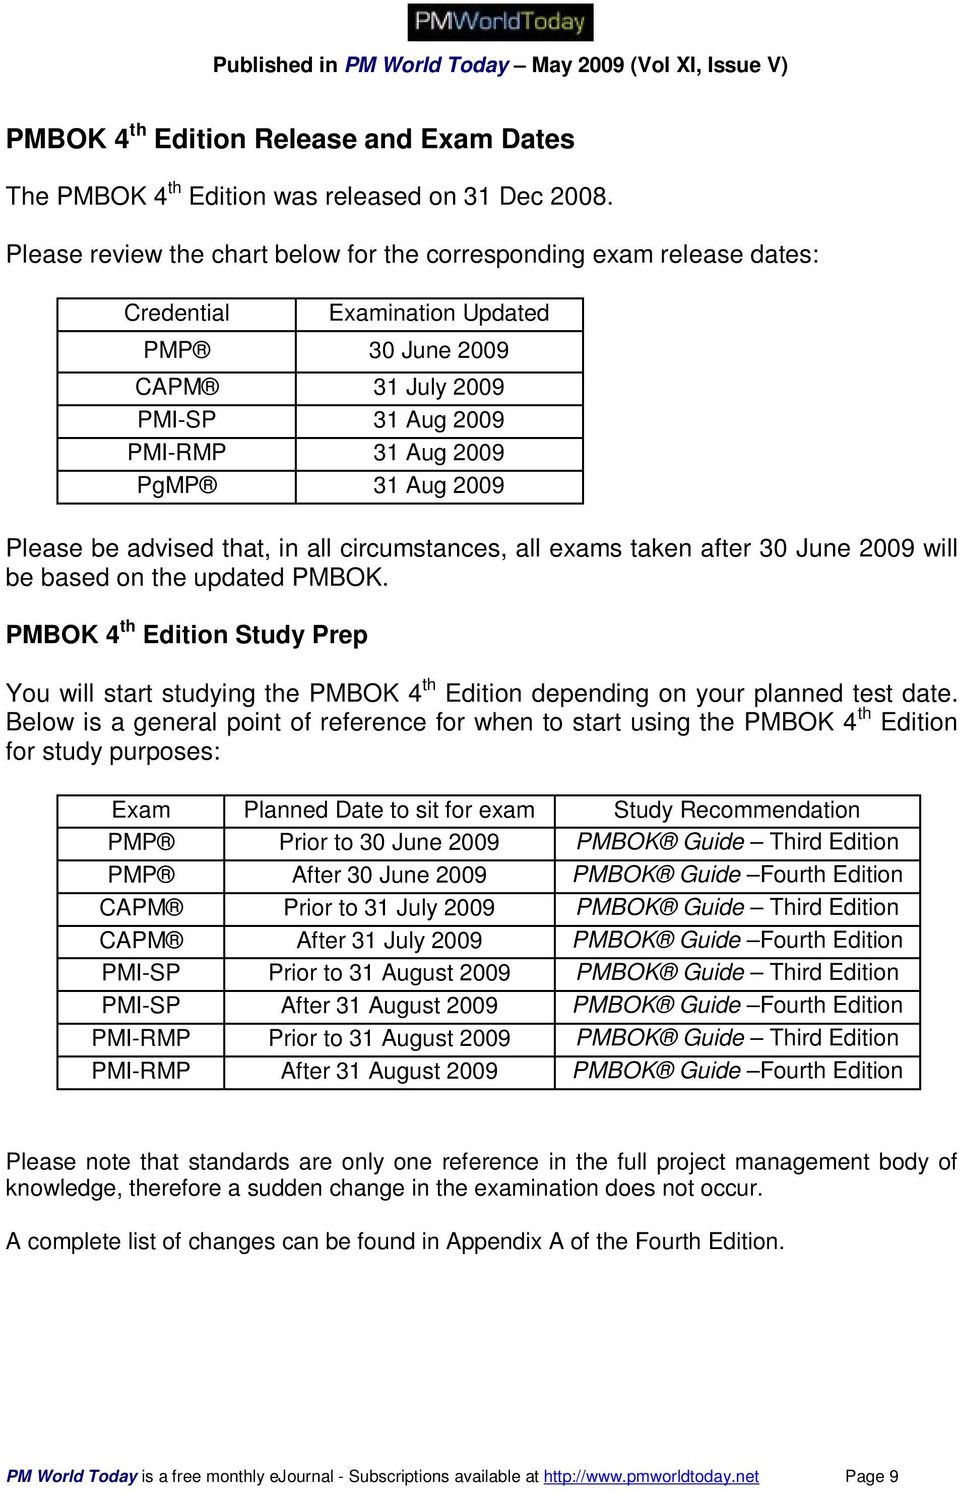 Please be advised that, in all circumstances, all exams taken after 30 June 2009 will be based on the updated PMBOK.